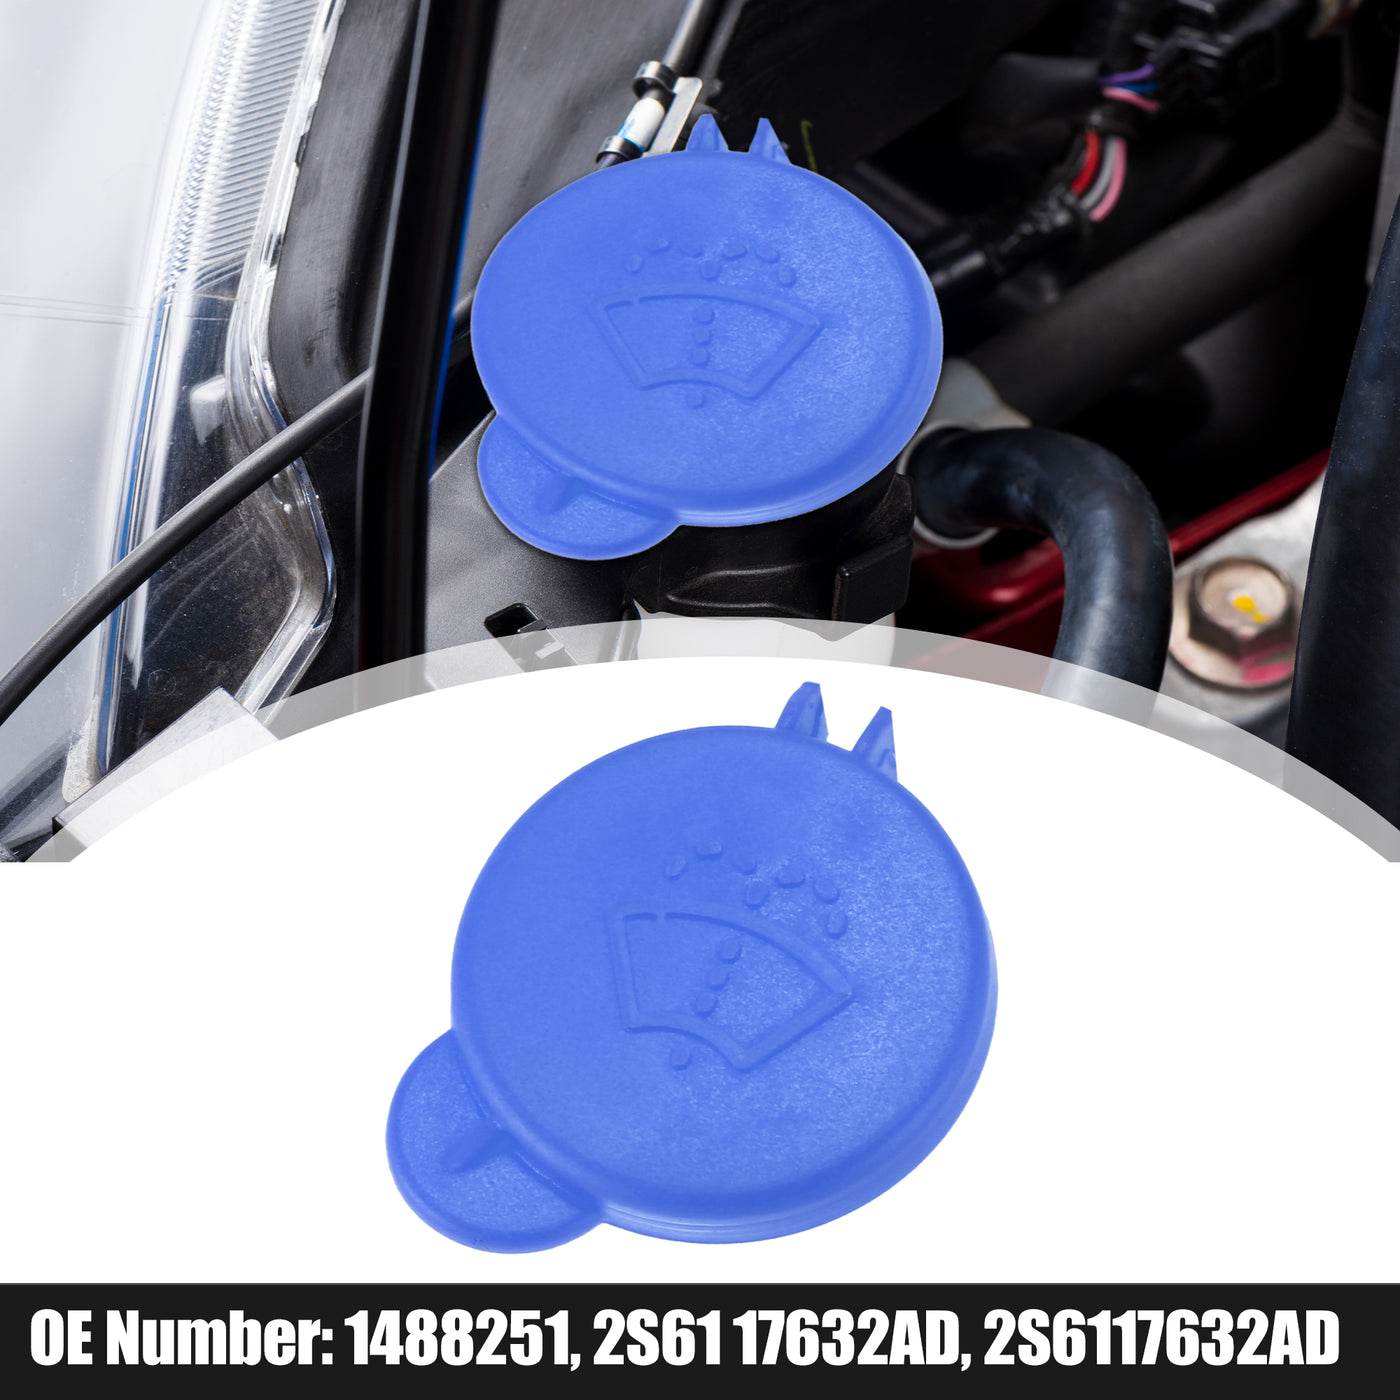 X AUTOHAUX 1488251 Blue Windshield Wiper Washer Fluid Reservoir Tank Bottle Cap Cover for Ford Fusion 2001-2008